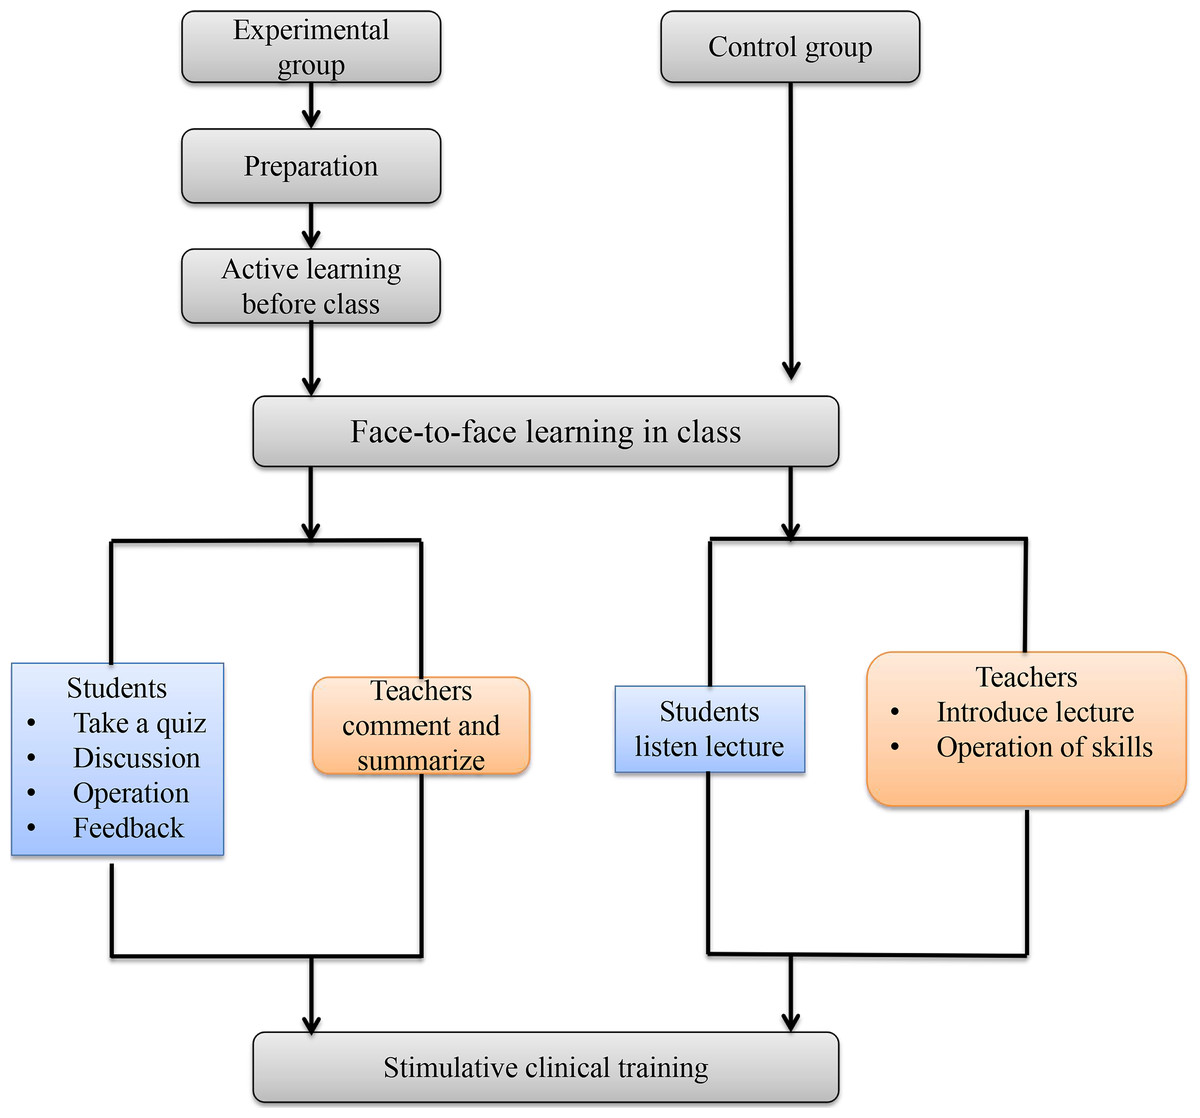 Application of blended learning approach in clinical skills to stimulate active learning attitudes and improve clinical among medical students [PeerJ]